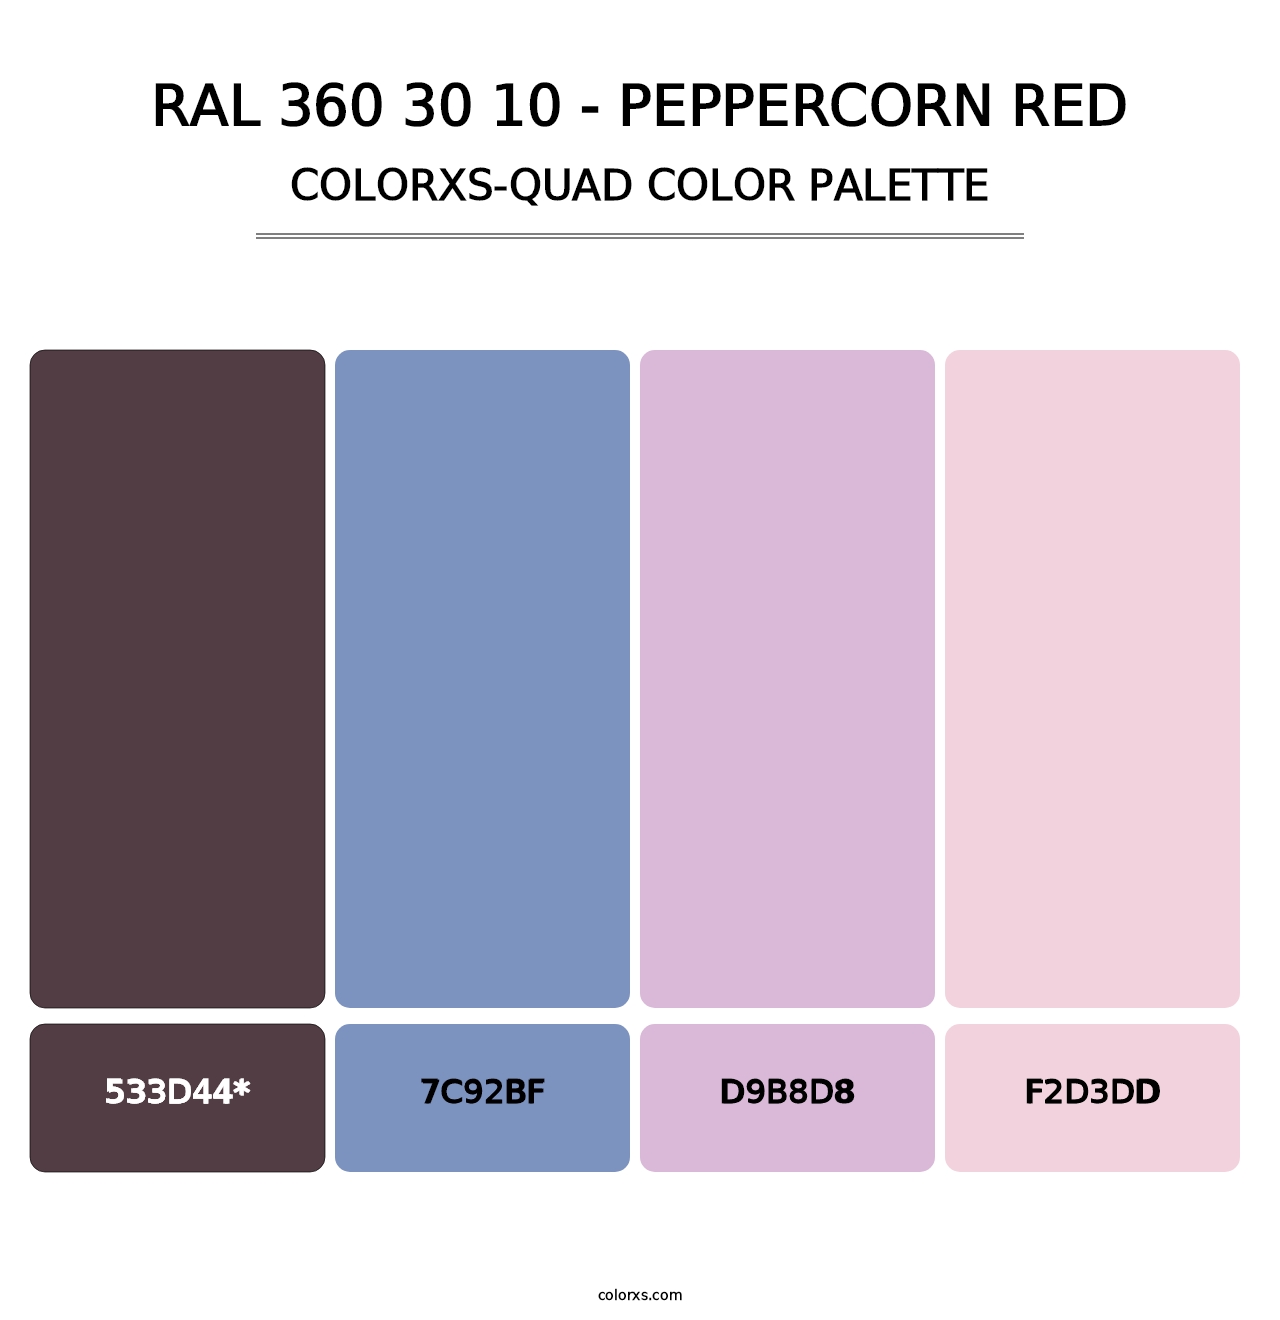 RAL 360 30 10 - Peppercorn Red - Colorxs Quad Palette